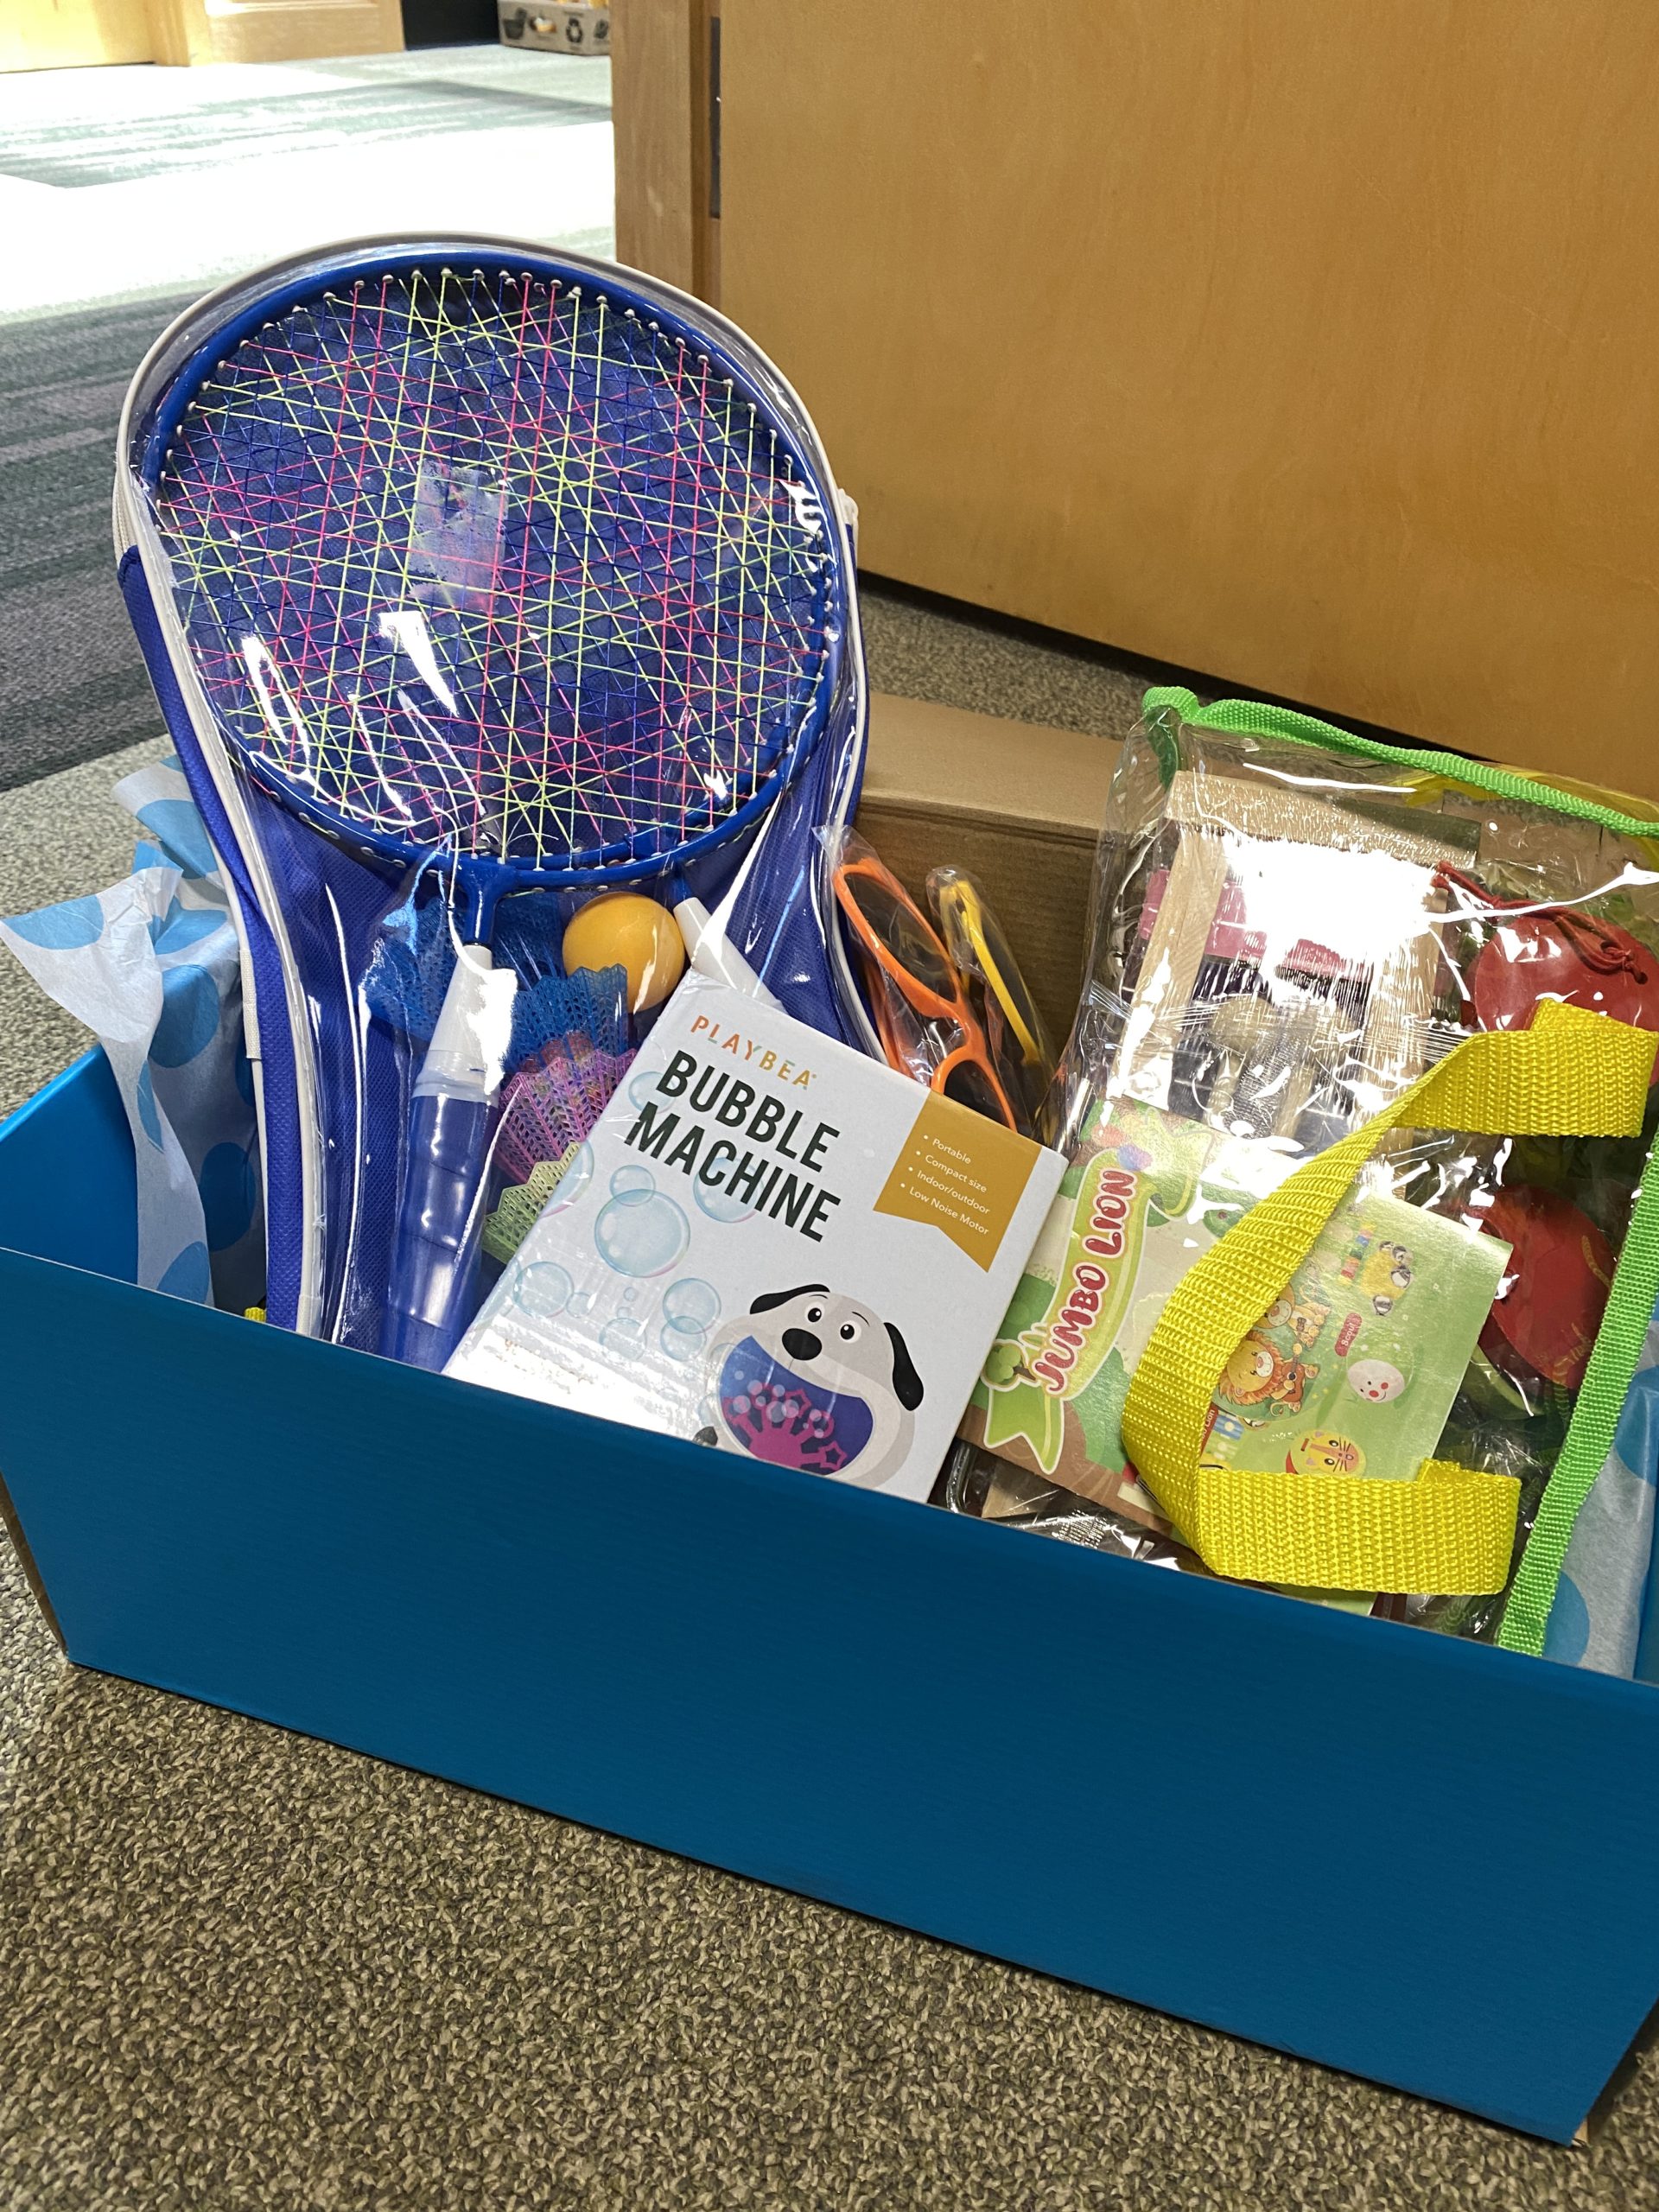 Blue box filled with badminton set, bubble machine, musical instruments